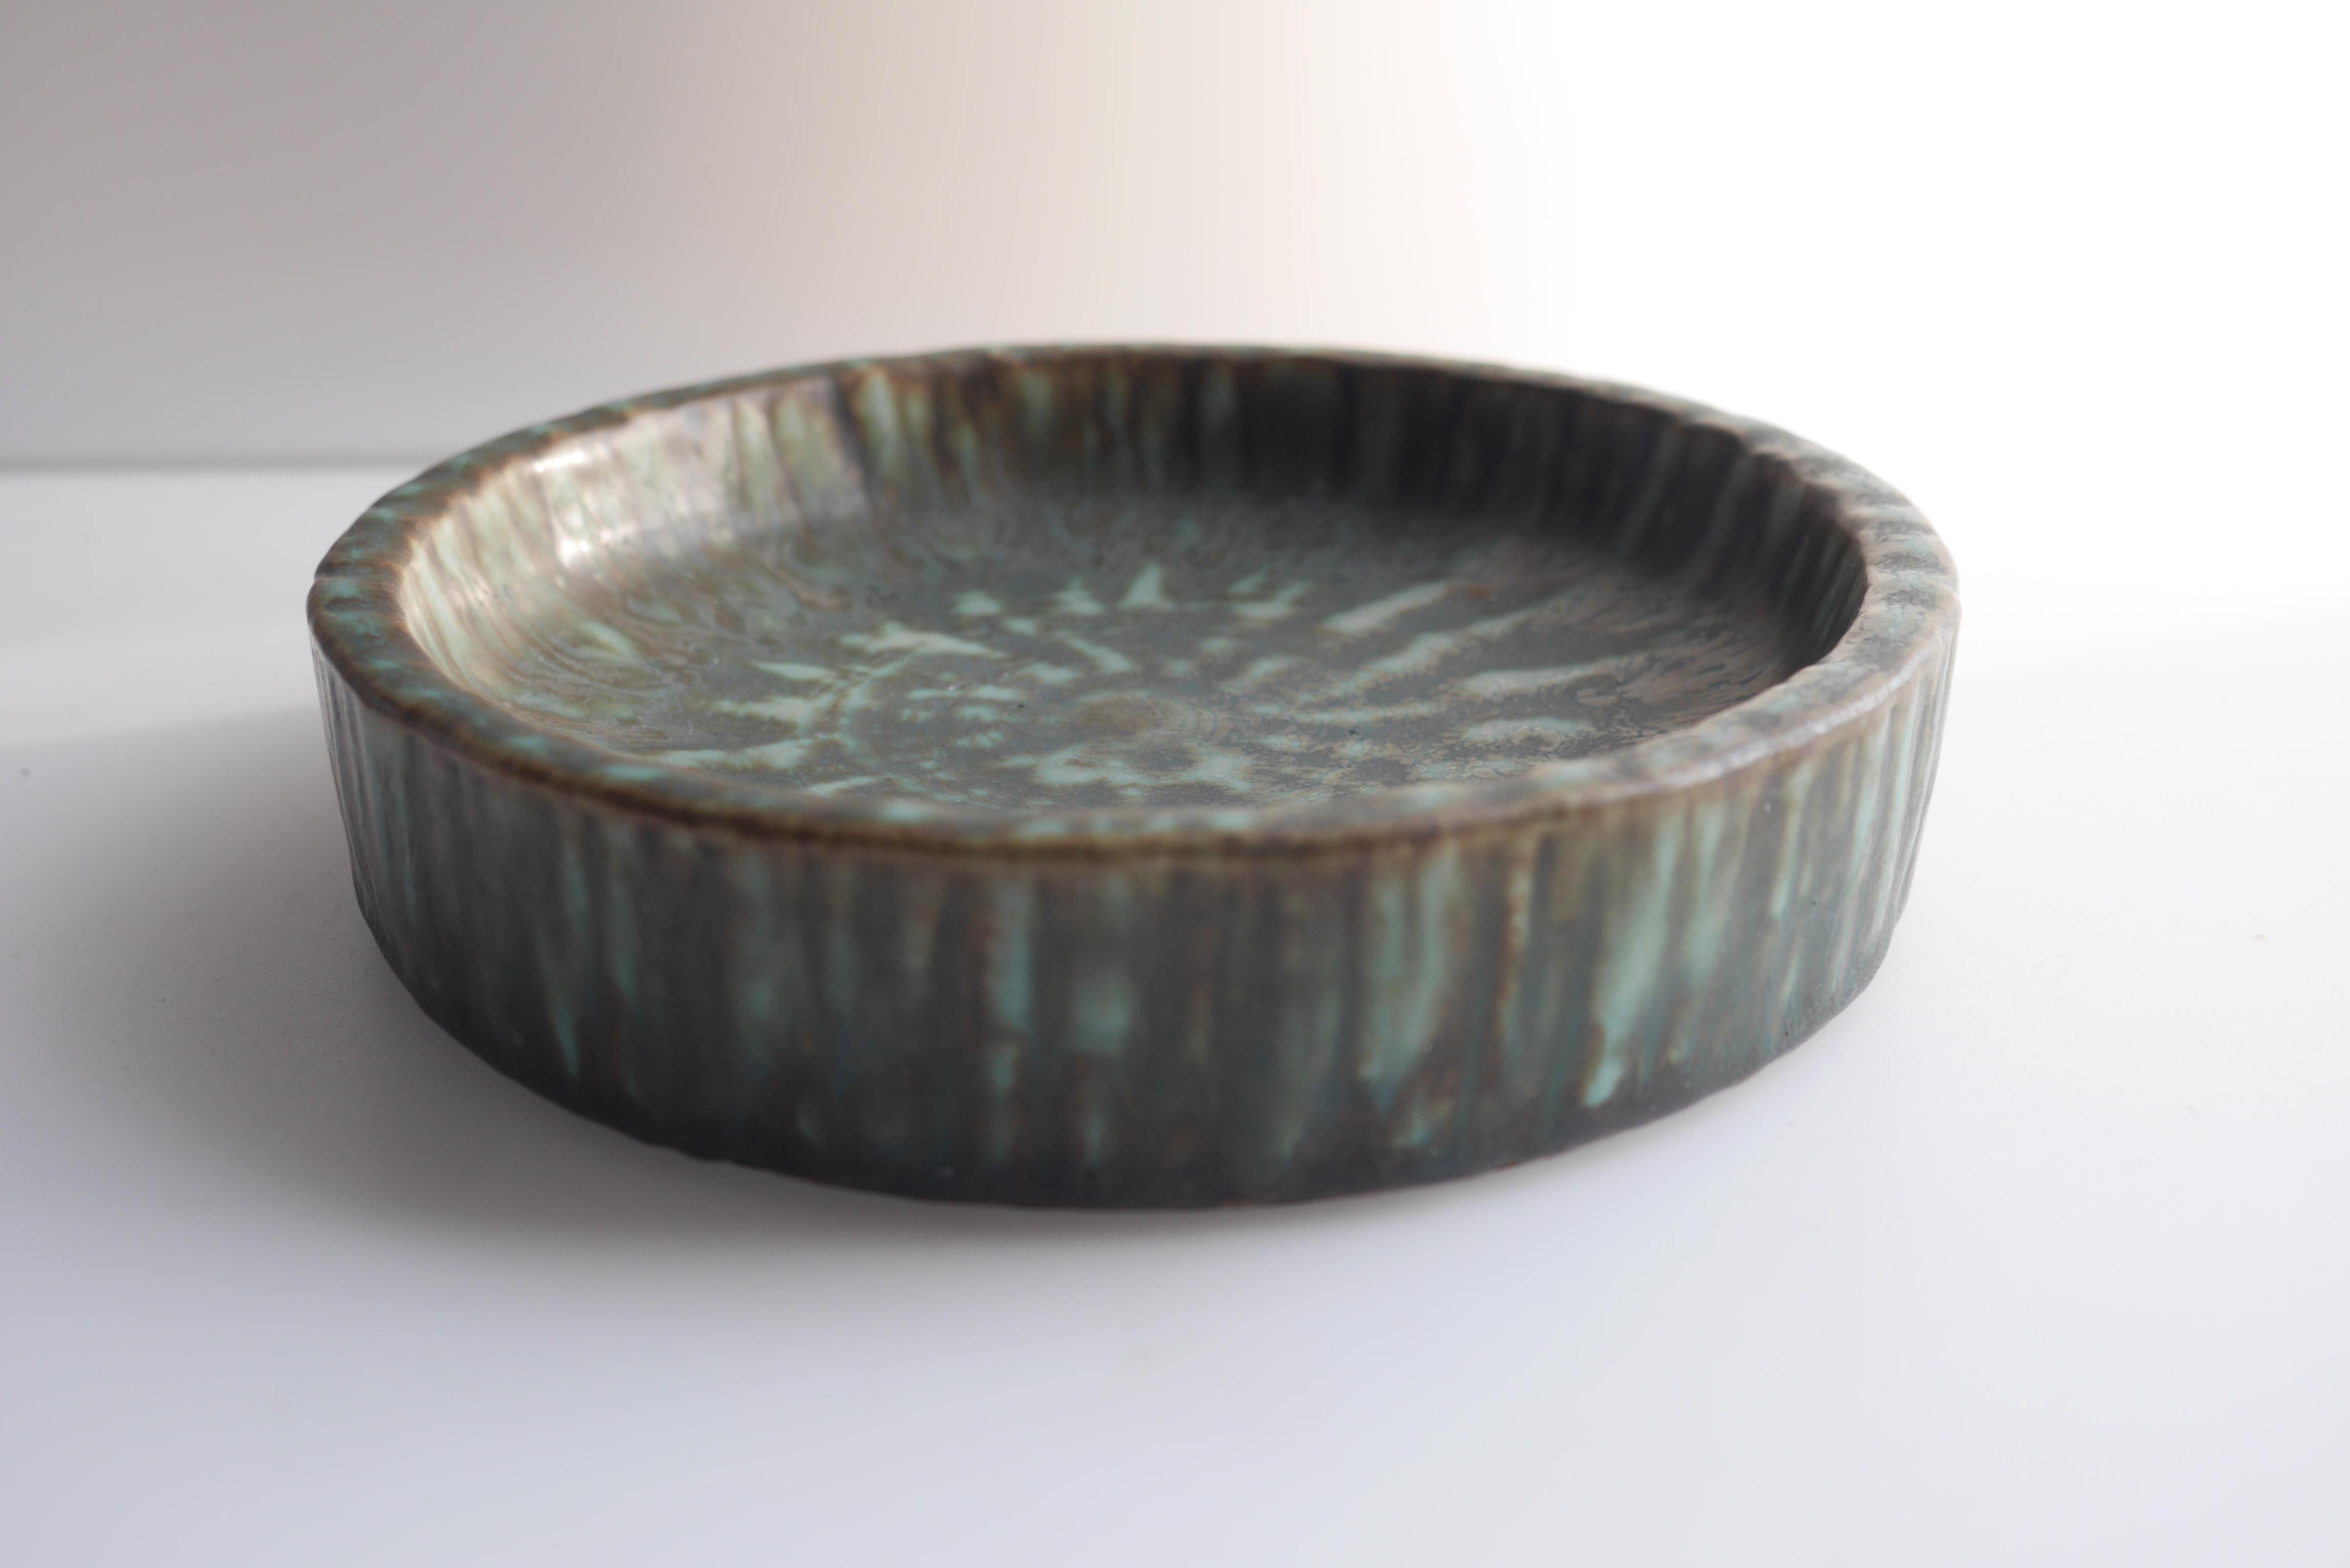 From Gunnar Nylund's 'Birka' series för Rörstrand, this beautiful shallow bowl has a subtle pale blue and brown textured glaze. This piece is in perfect condition. 

The Birka series included bowls, vases and pots and had three different glazes for